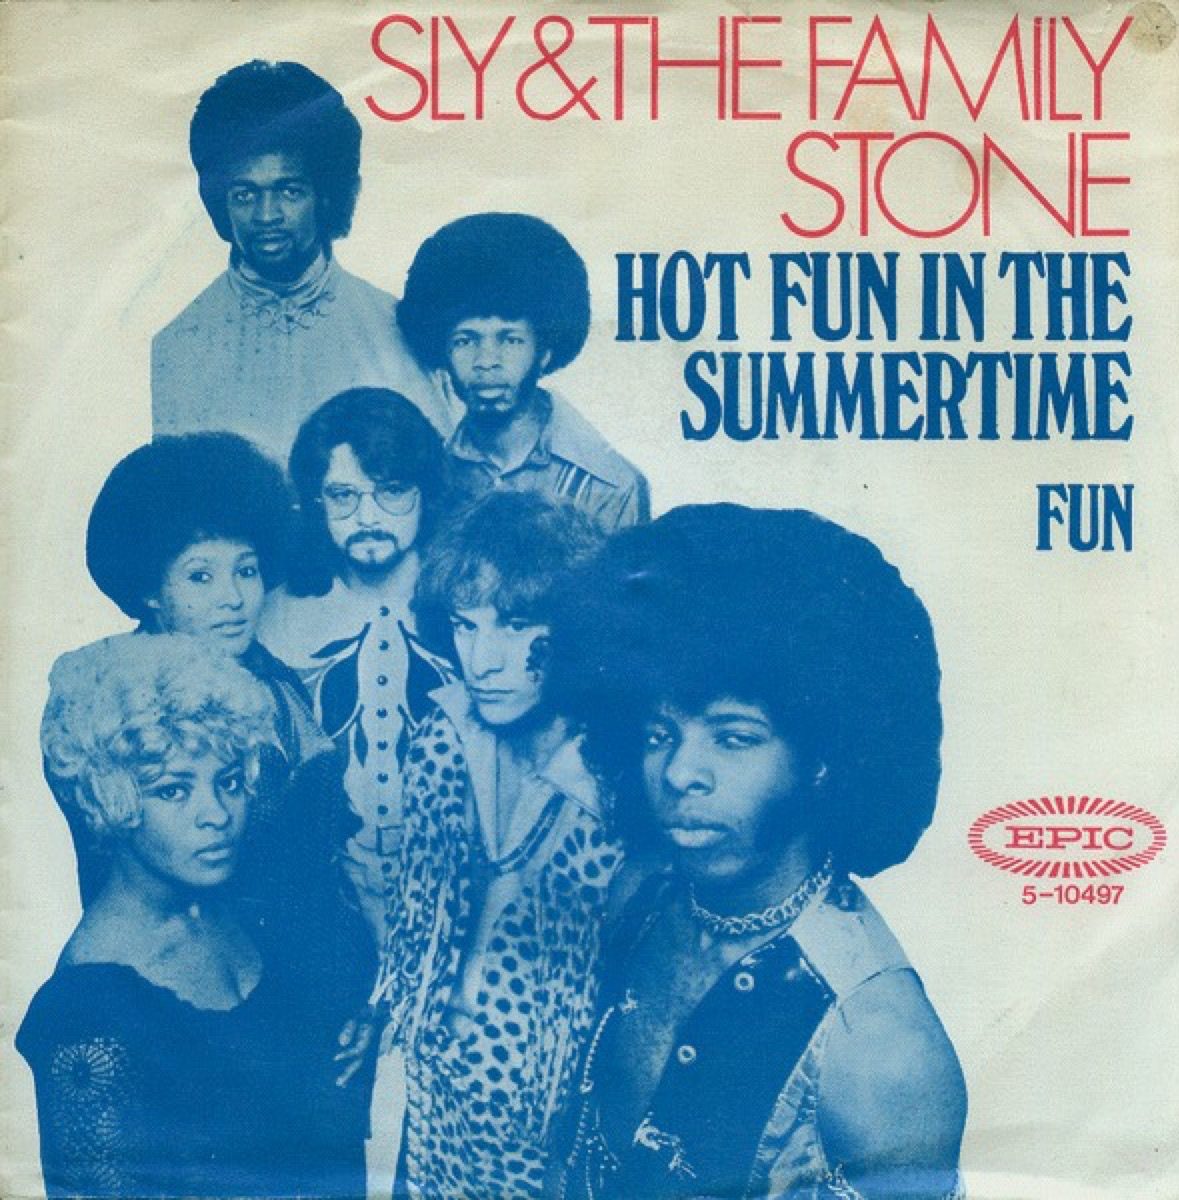 sly and the family stone hot fun in the summertime single cover, top 50 songs 1969